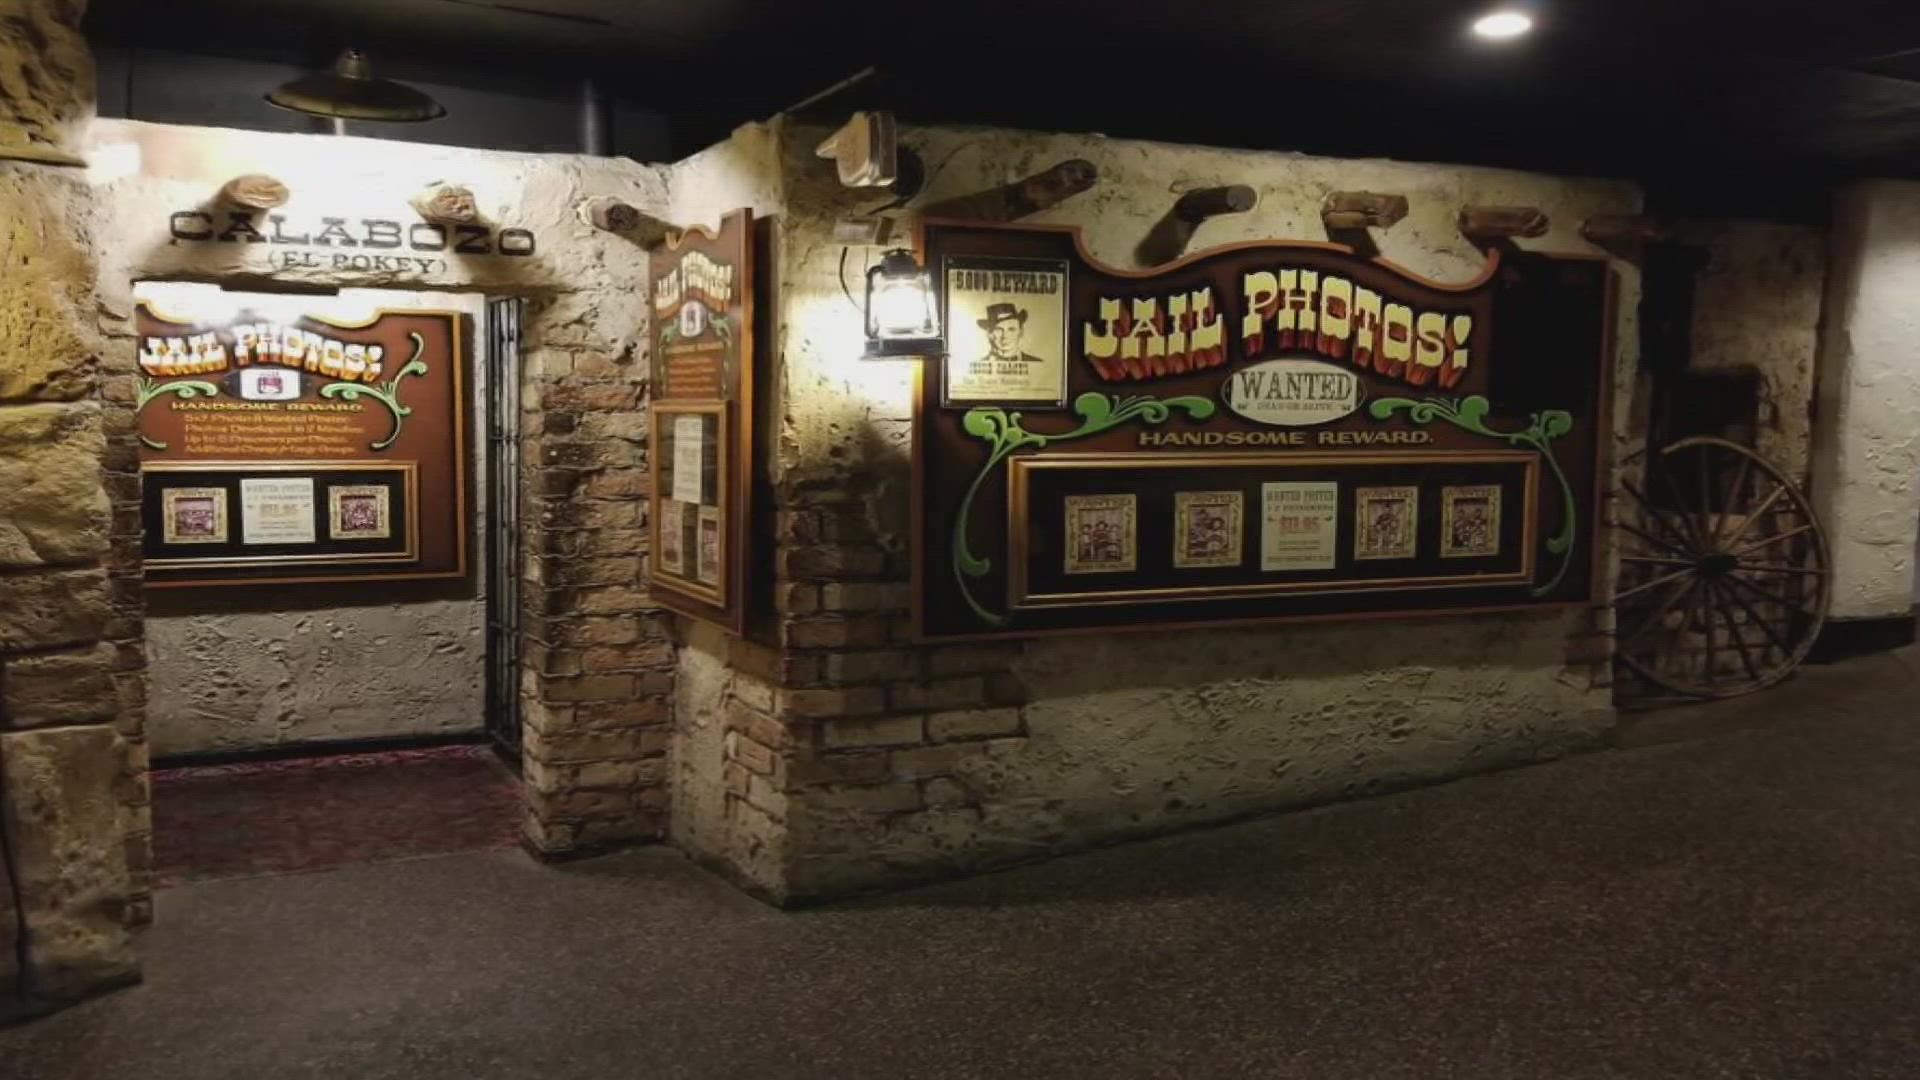 The man who spent 45 years operating the “Jail Photos!” room at Casa Bonita speaks to 9NEWS about selling some historic items from the iconic restaurant.